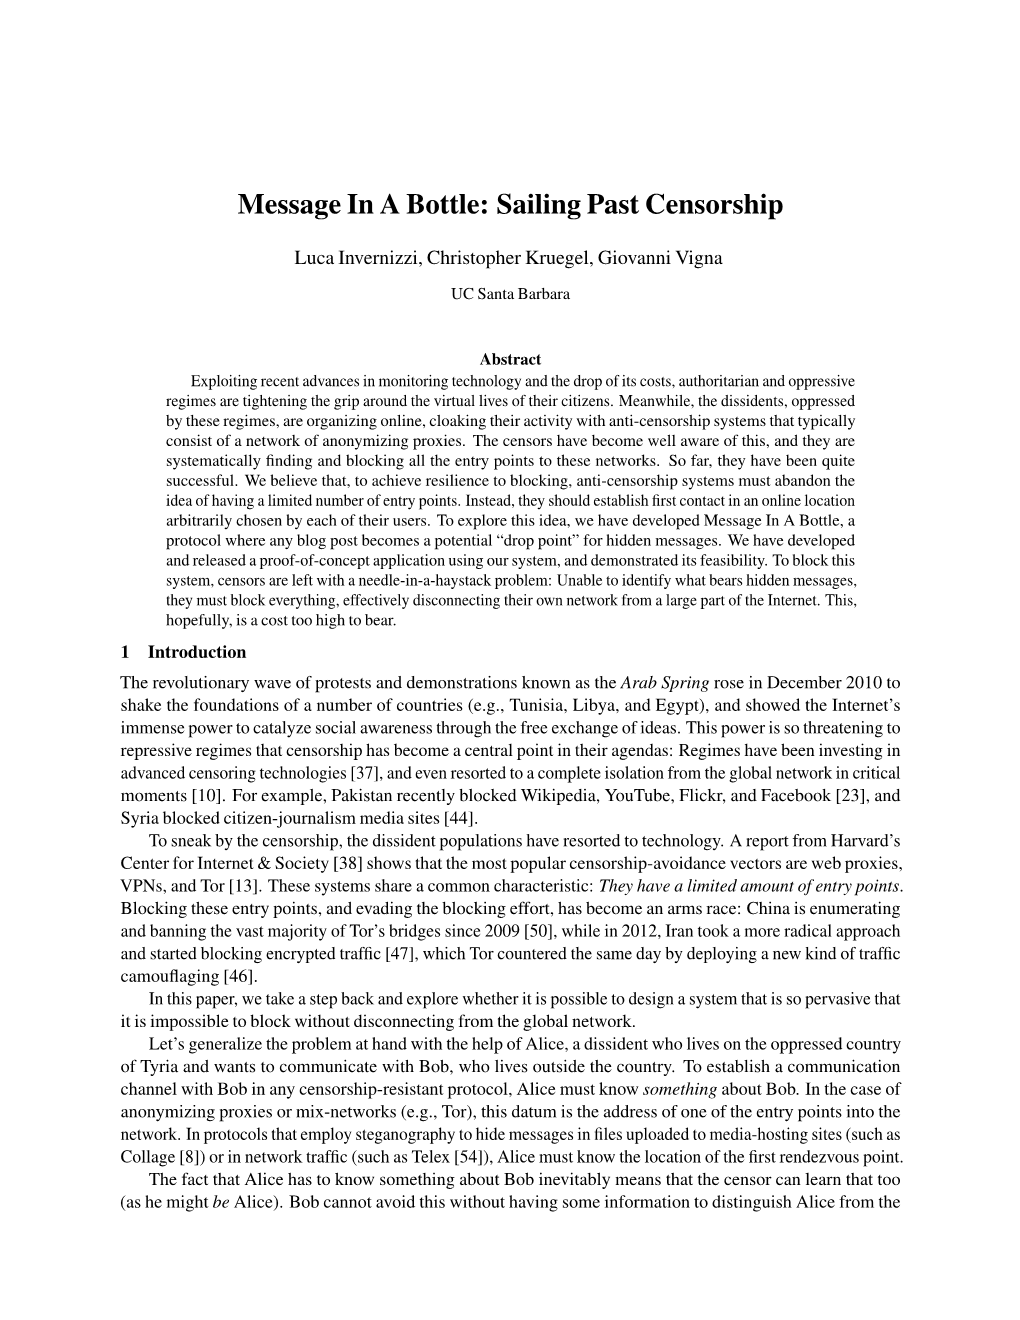 Message in a Bottle: Sailing Past Censorship